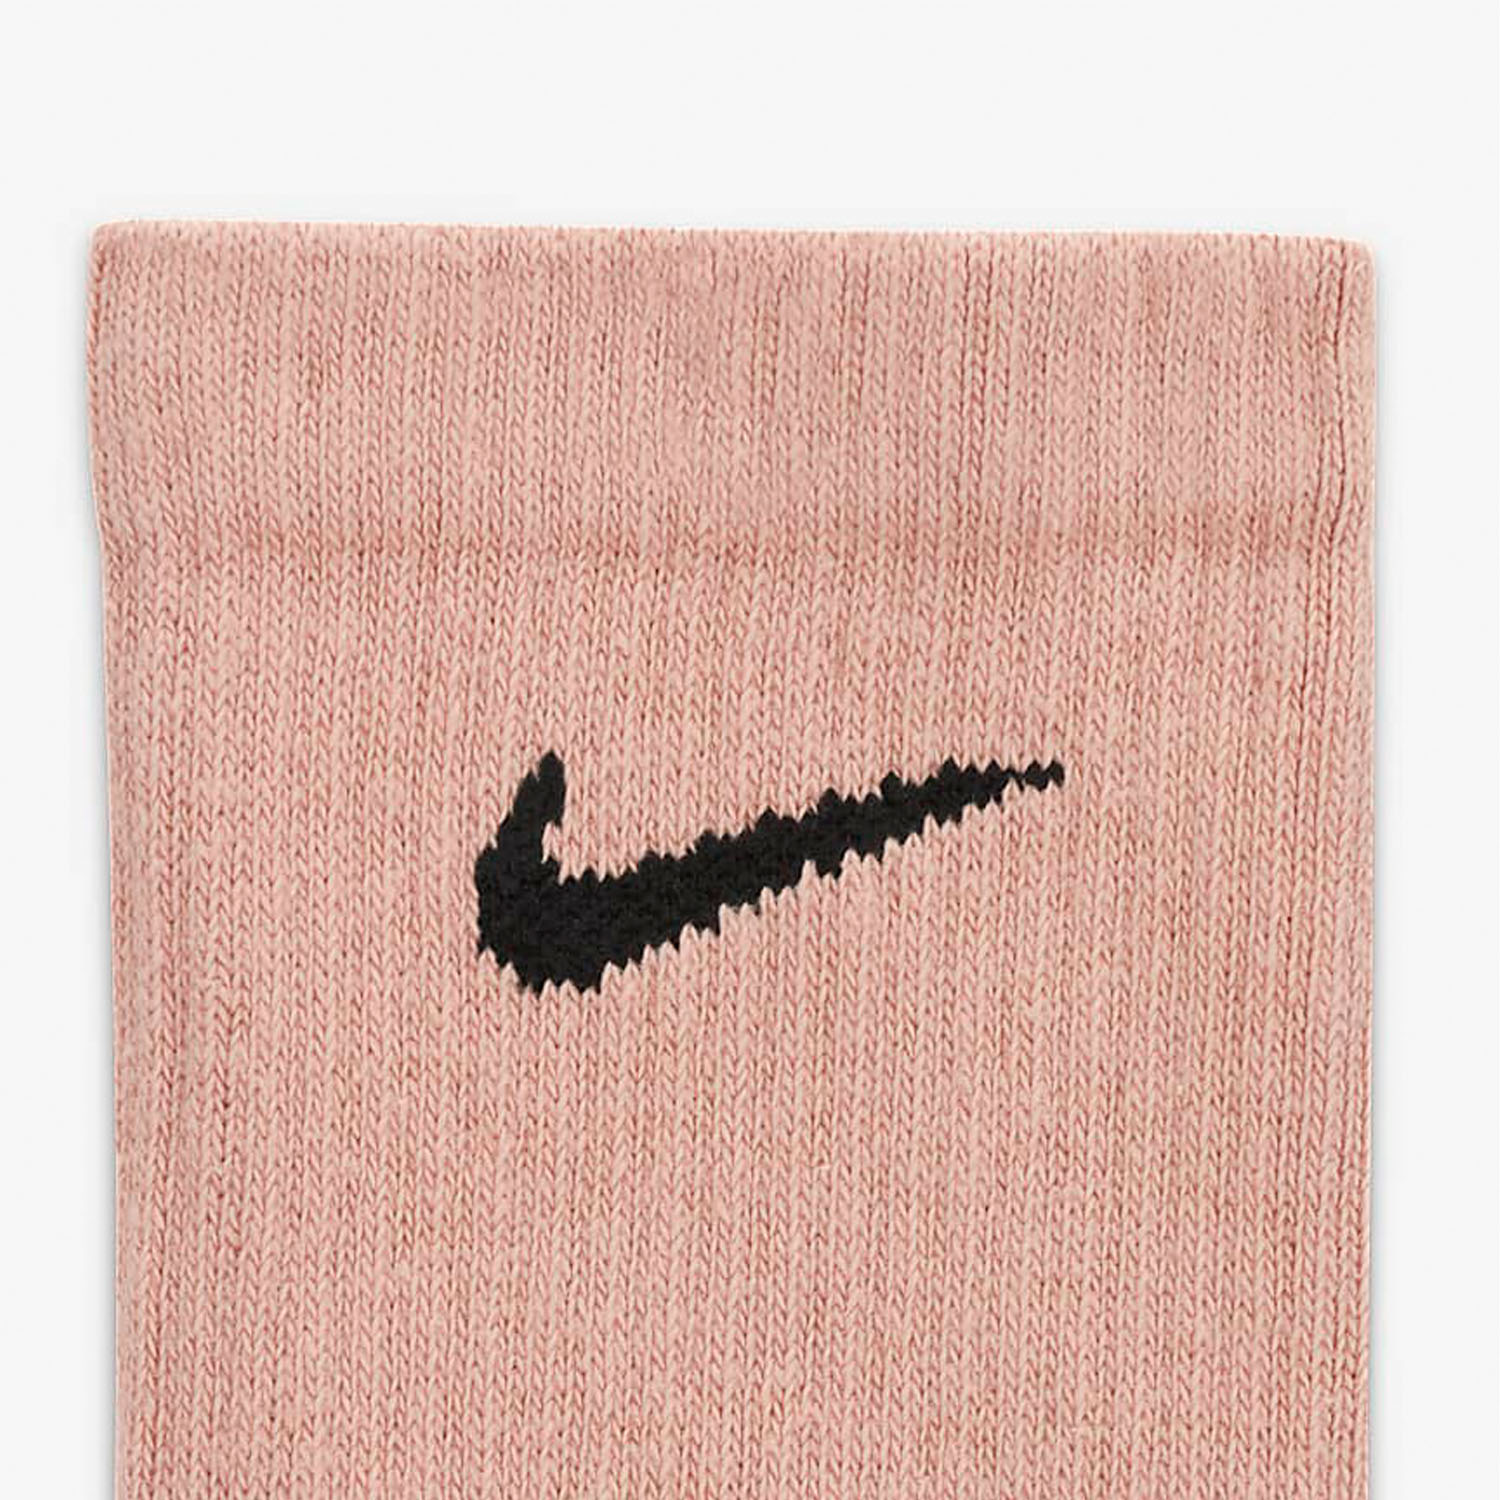 Nike Everyday Plus Cushioned x 3 Calcetines - Pink/Black